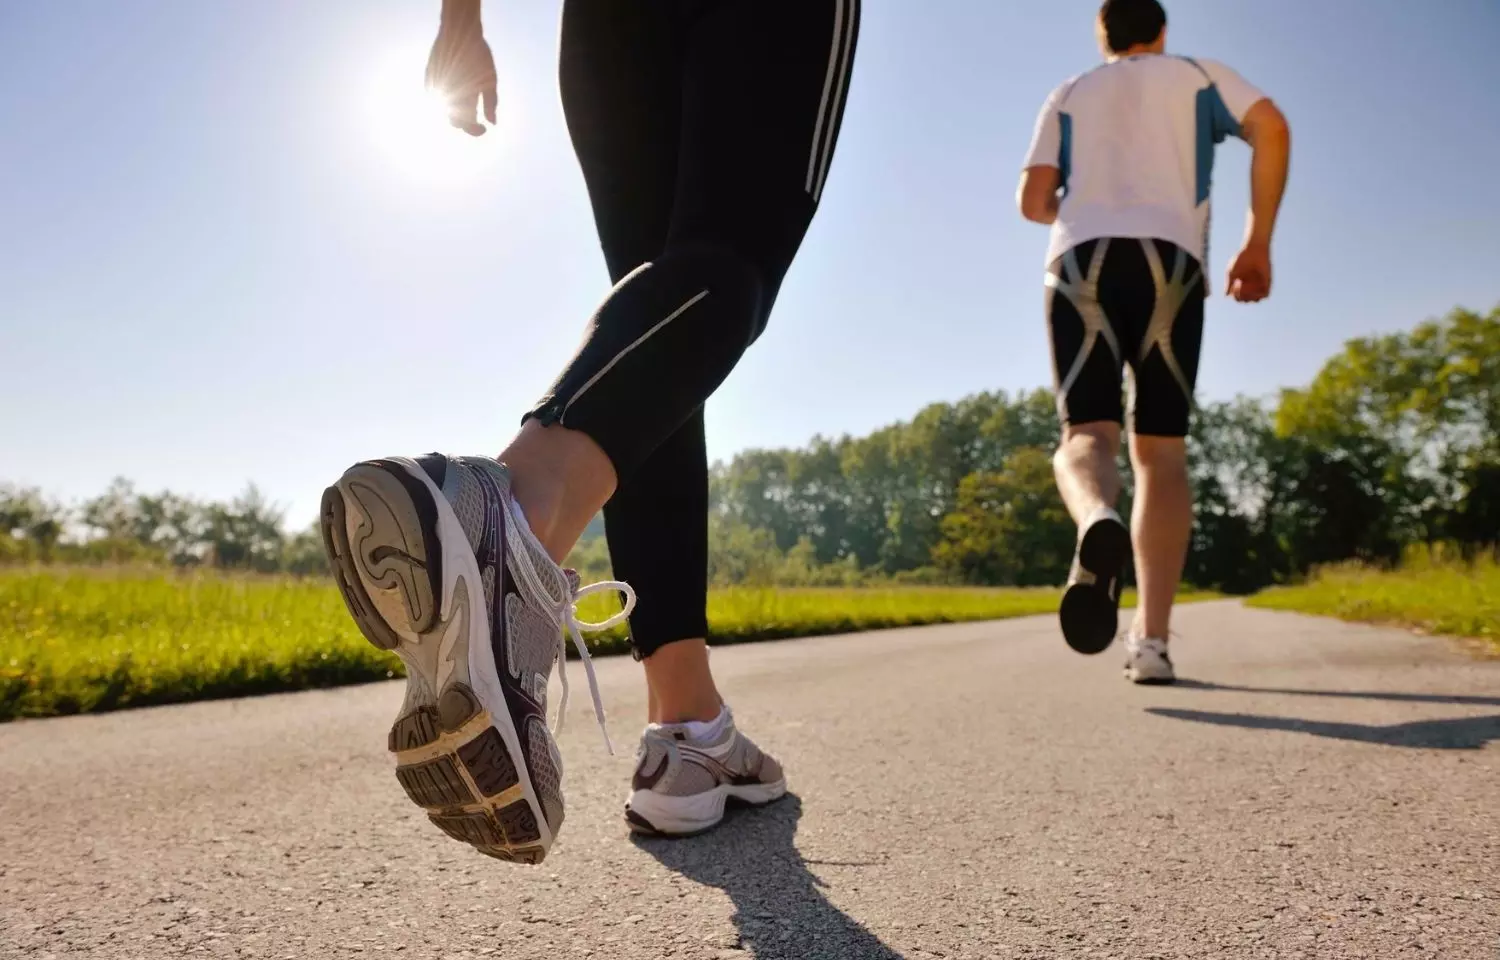 Weekend warriors and regular exercise gives equal health benefits, lowers mortality: JAMA